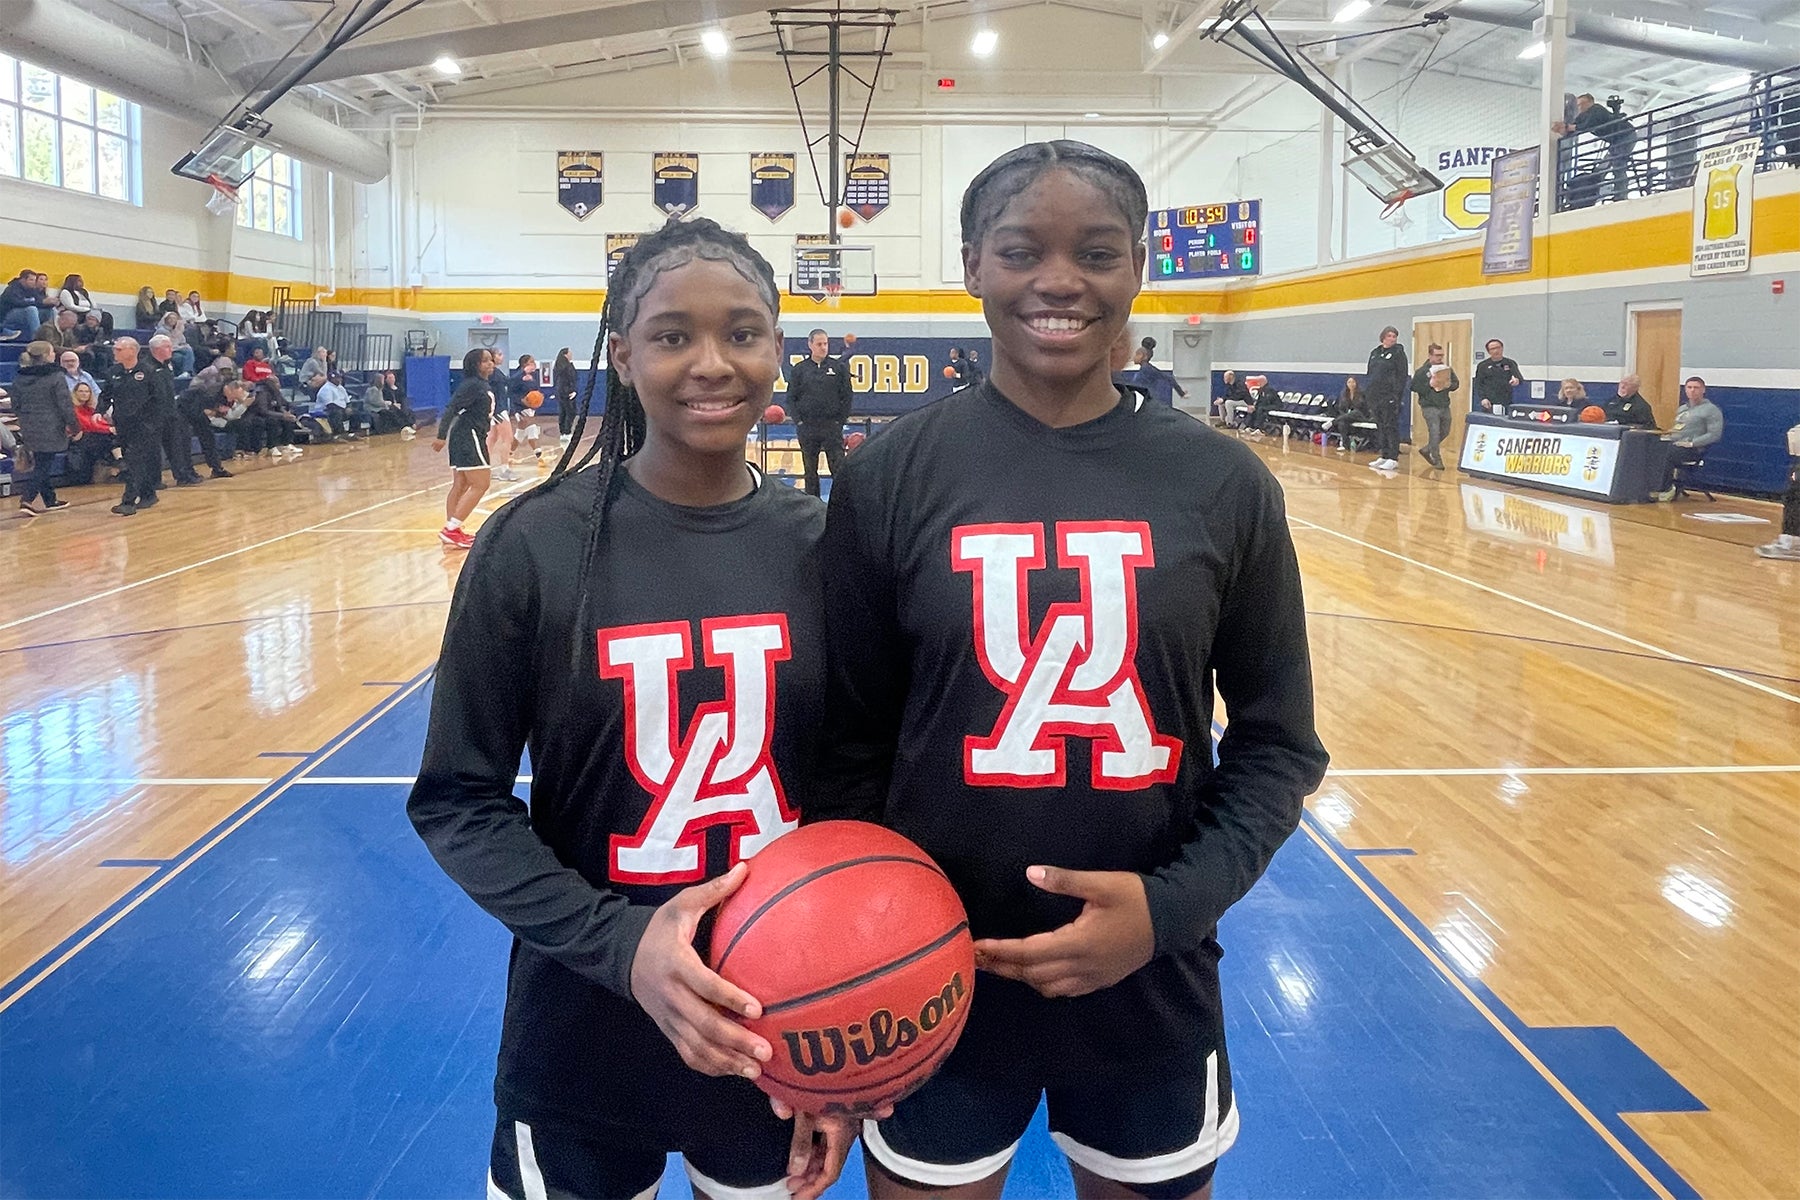 College scholarship offers pour in for 2 Delaware freshmen teammates